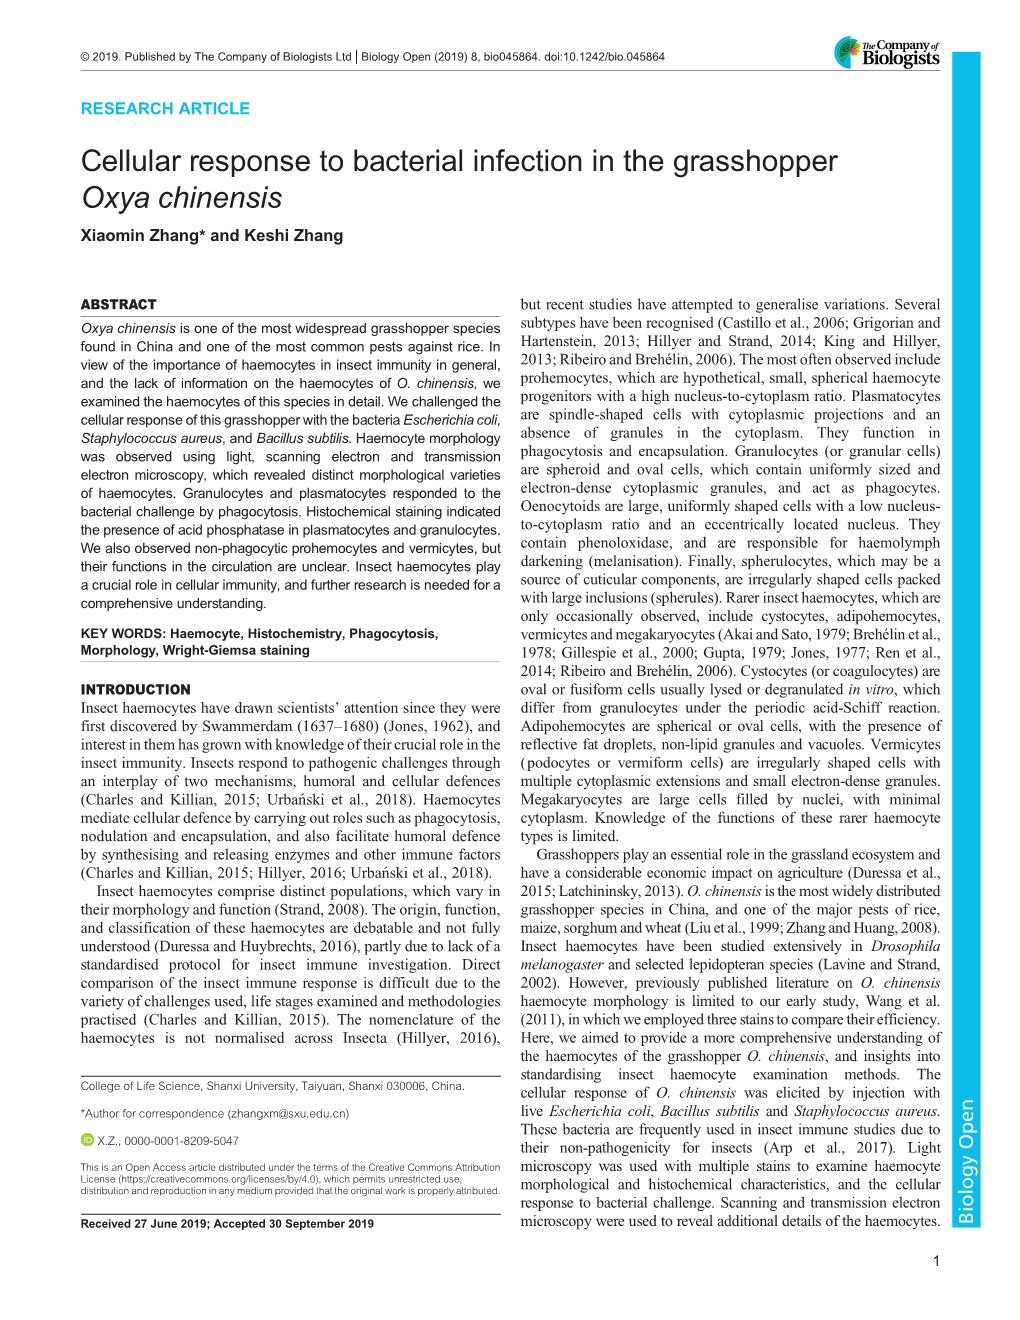 Cellular Response to Bacterial Infection in the Grasshopper &lt;Italic